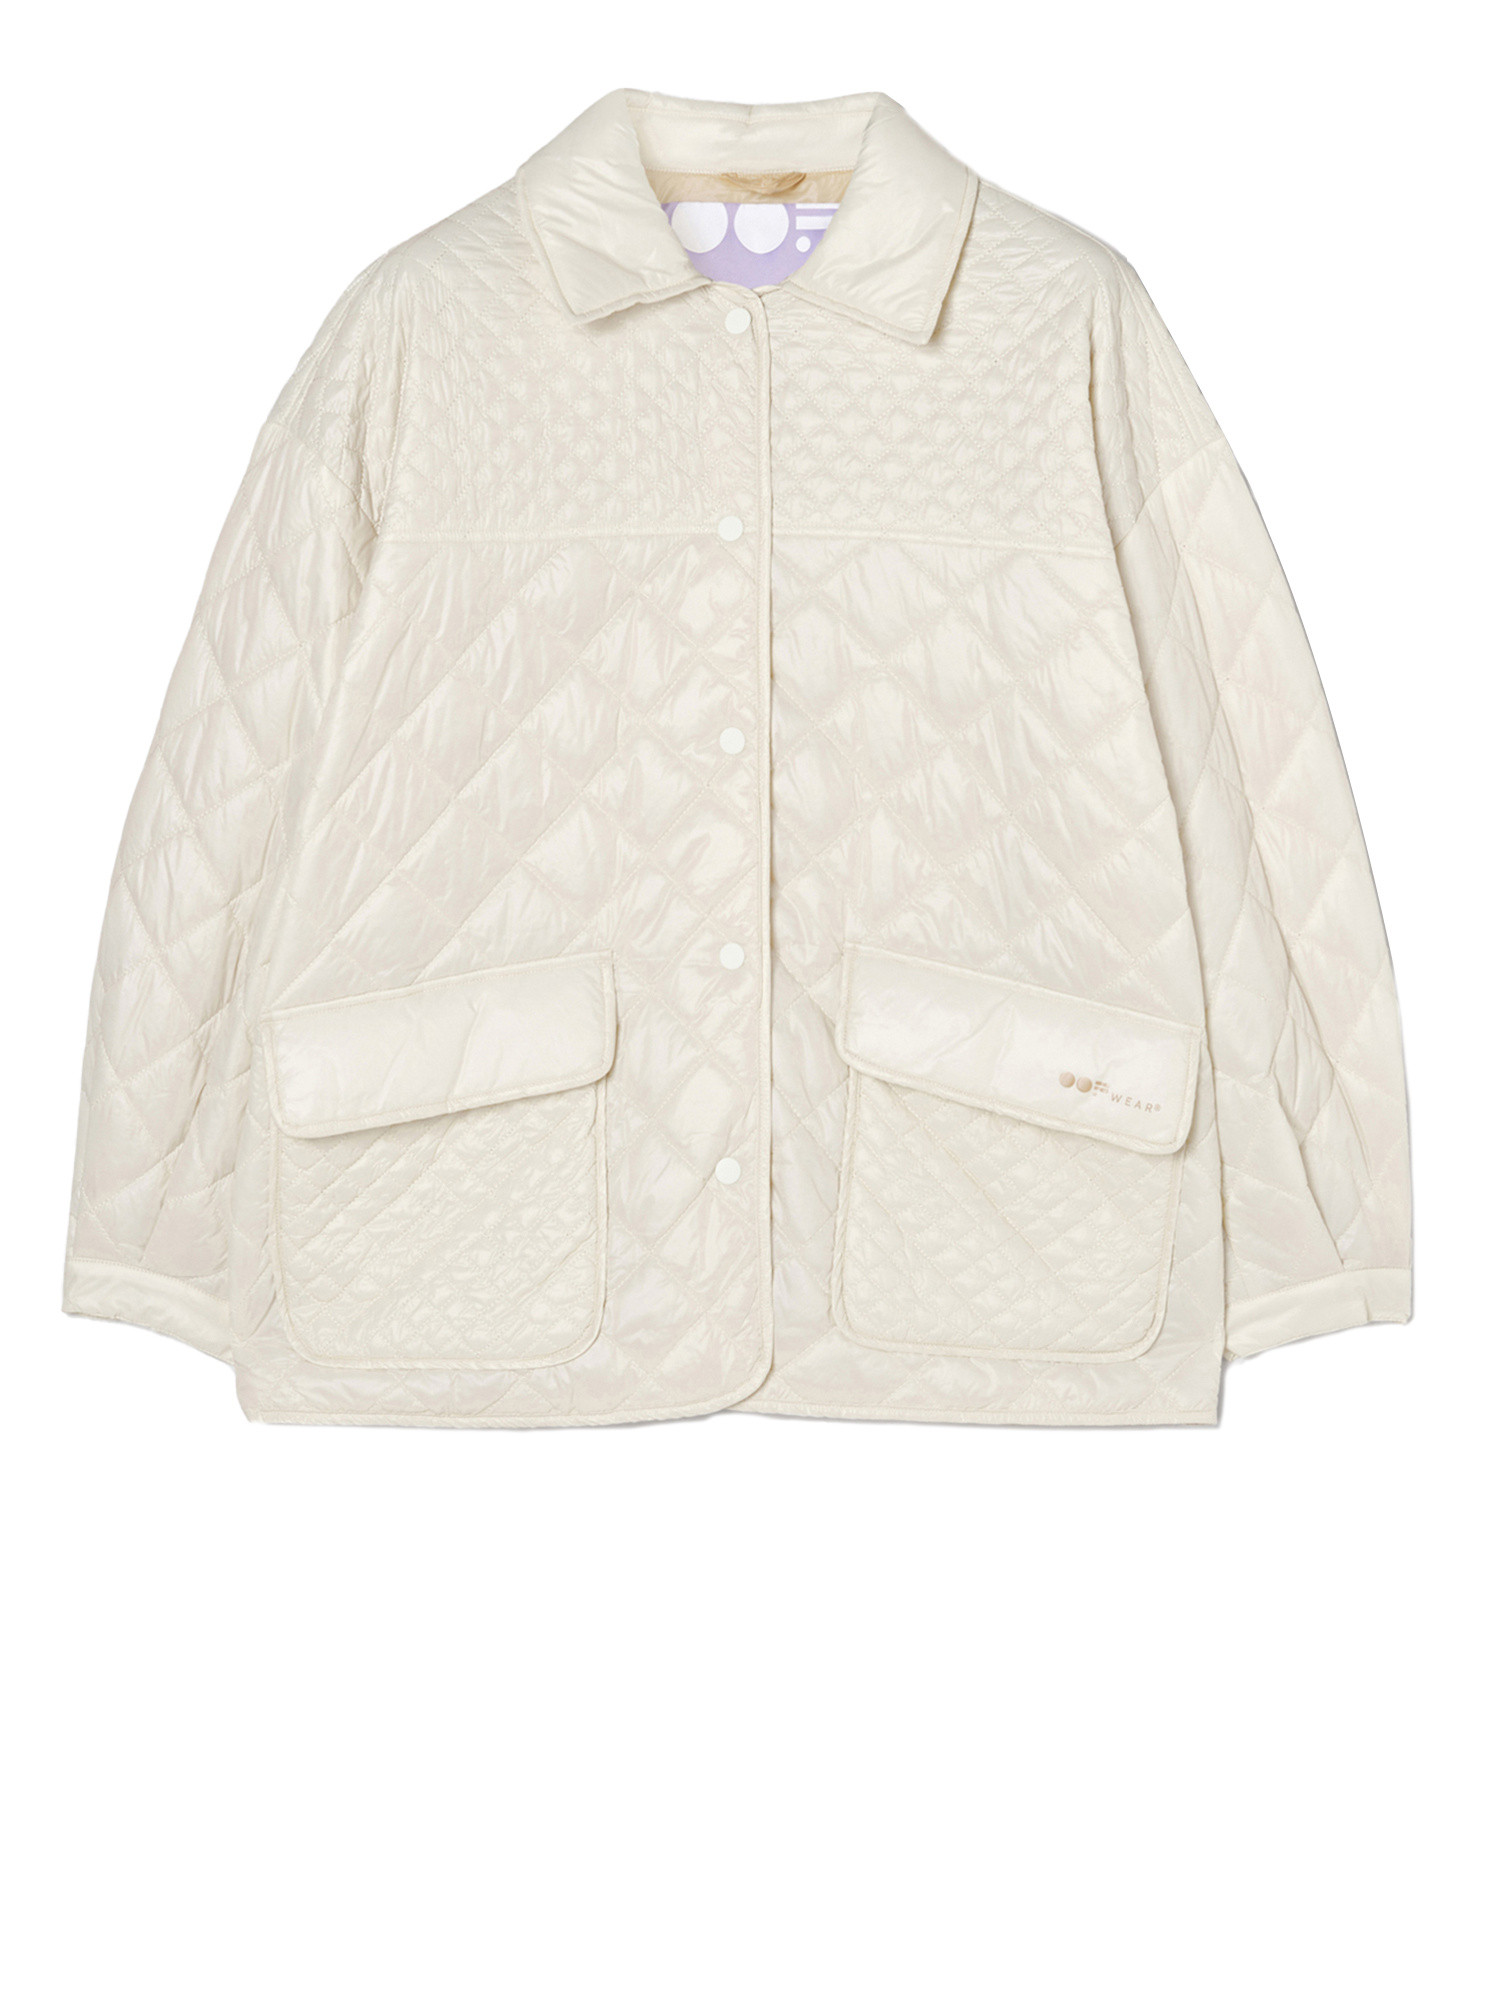 Oof Wear - Quilted Jacket, White Cream, large image number 0